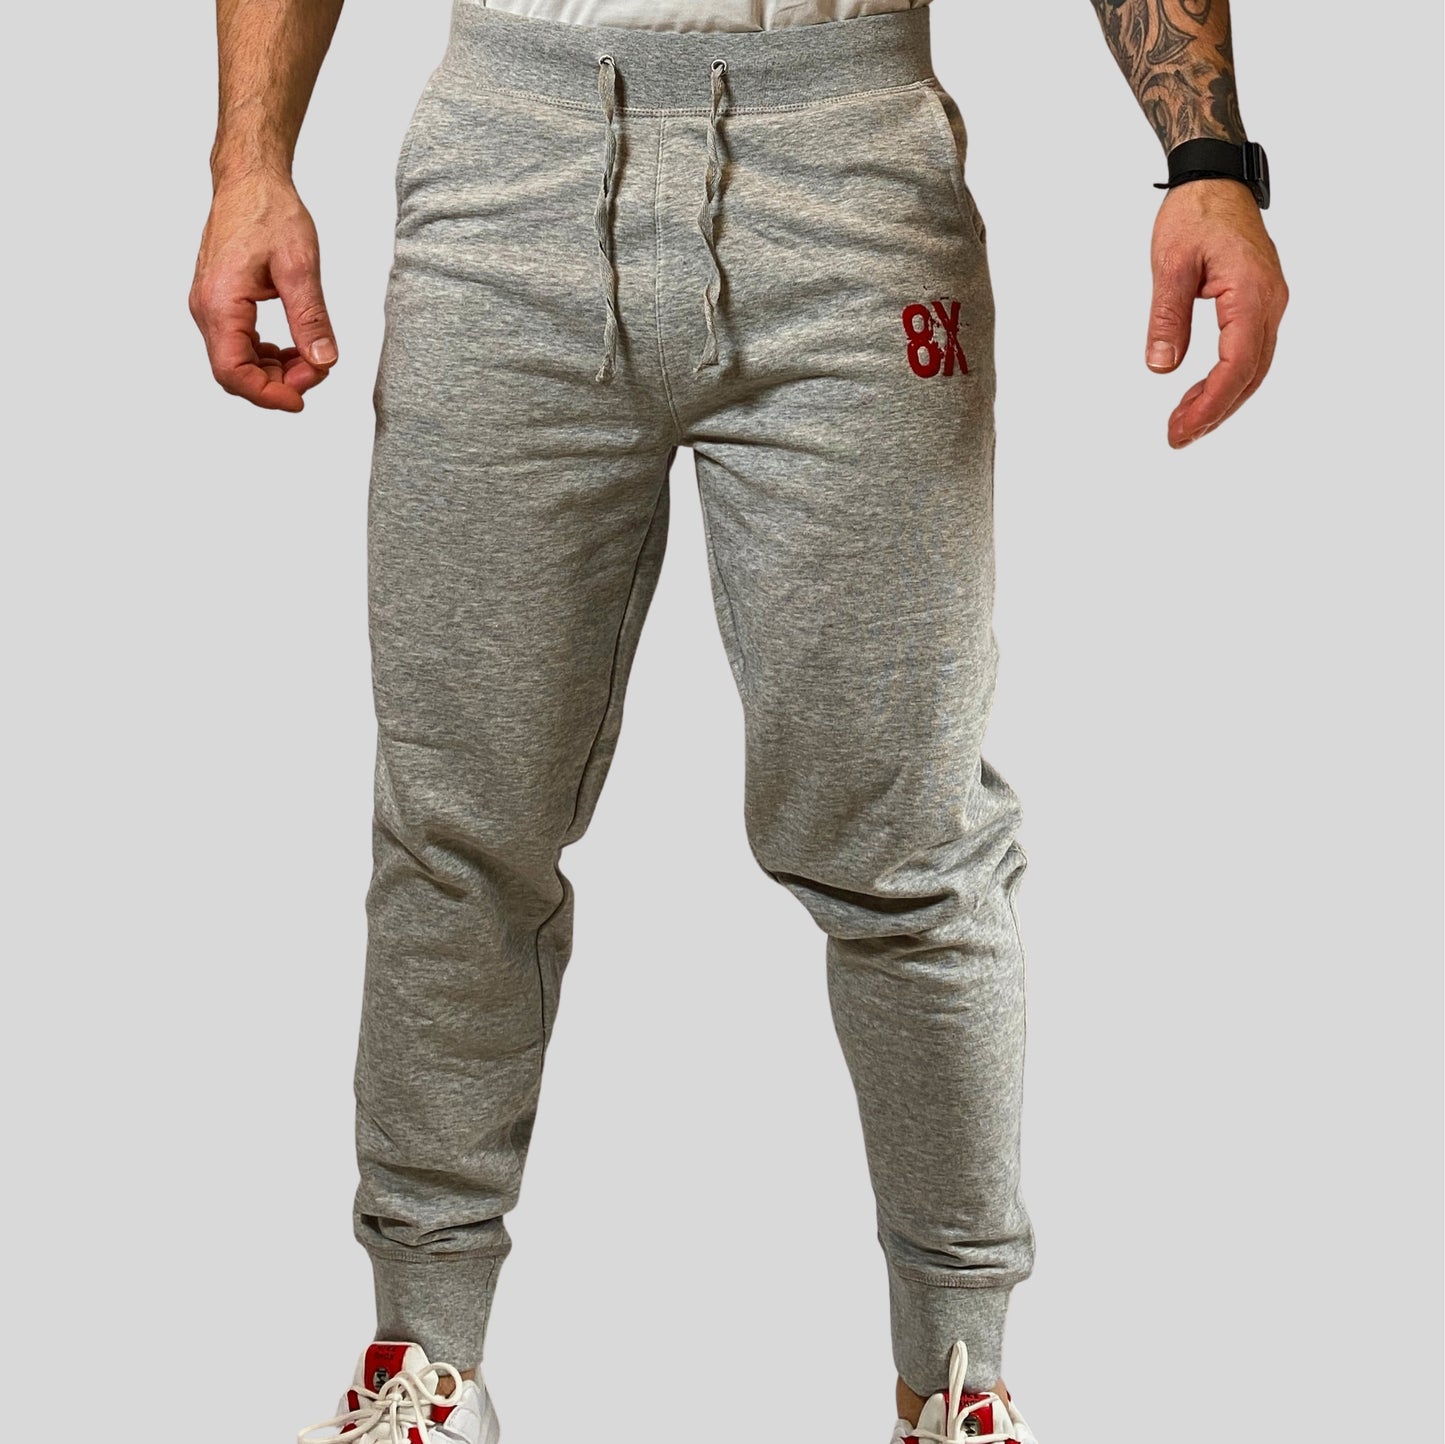 EVERYDAY | Unisex Embroidered 8X Slim Cuffed Joggers | Heather Grey